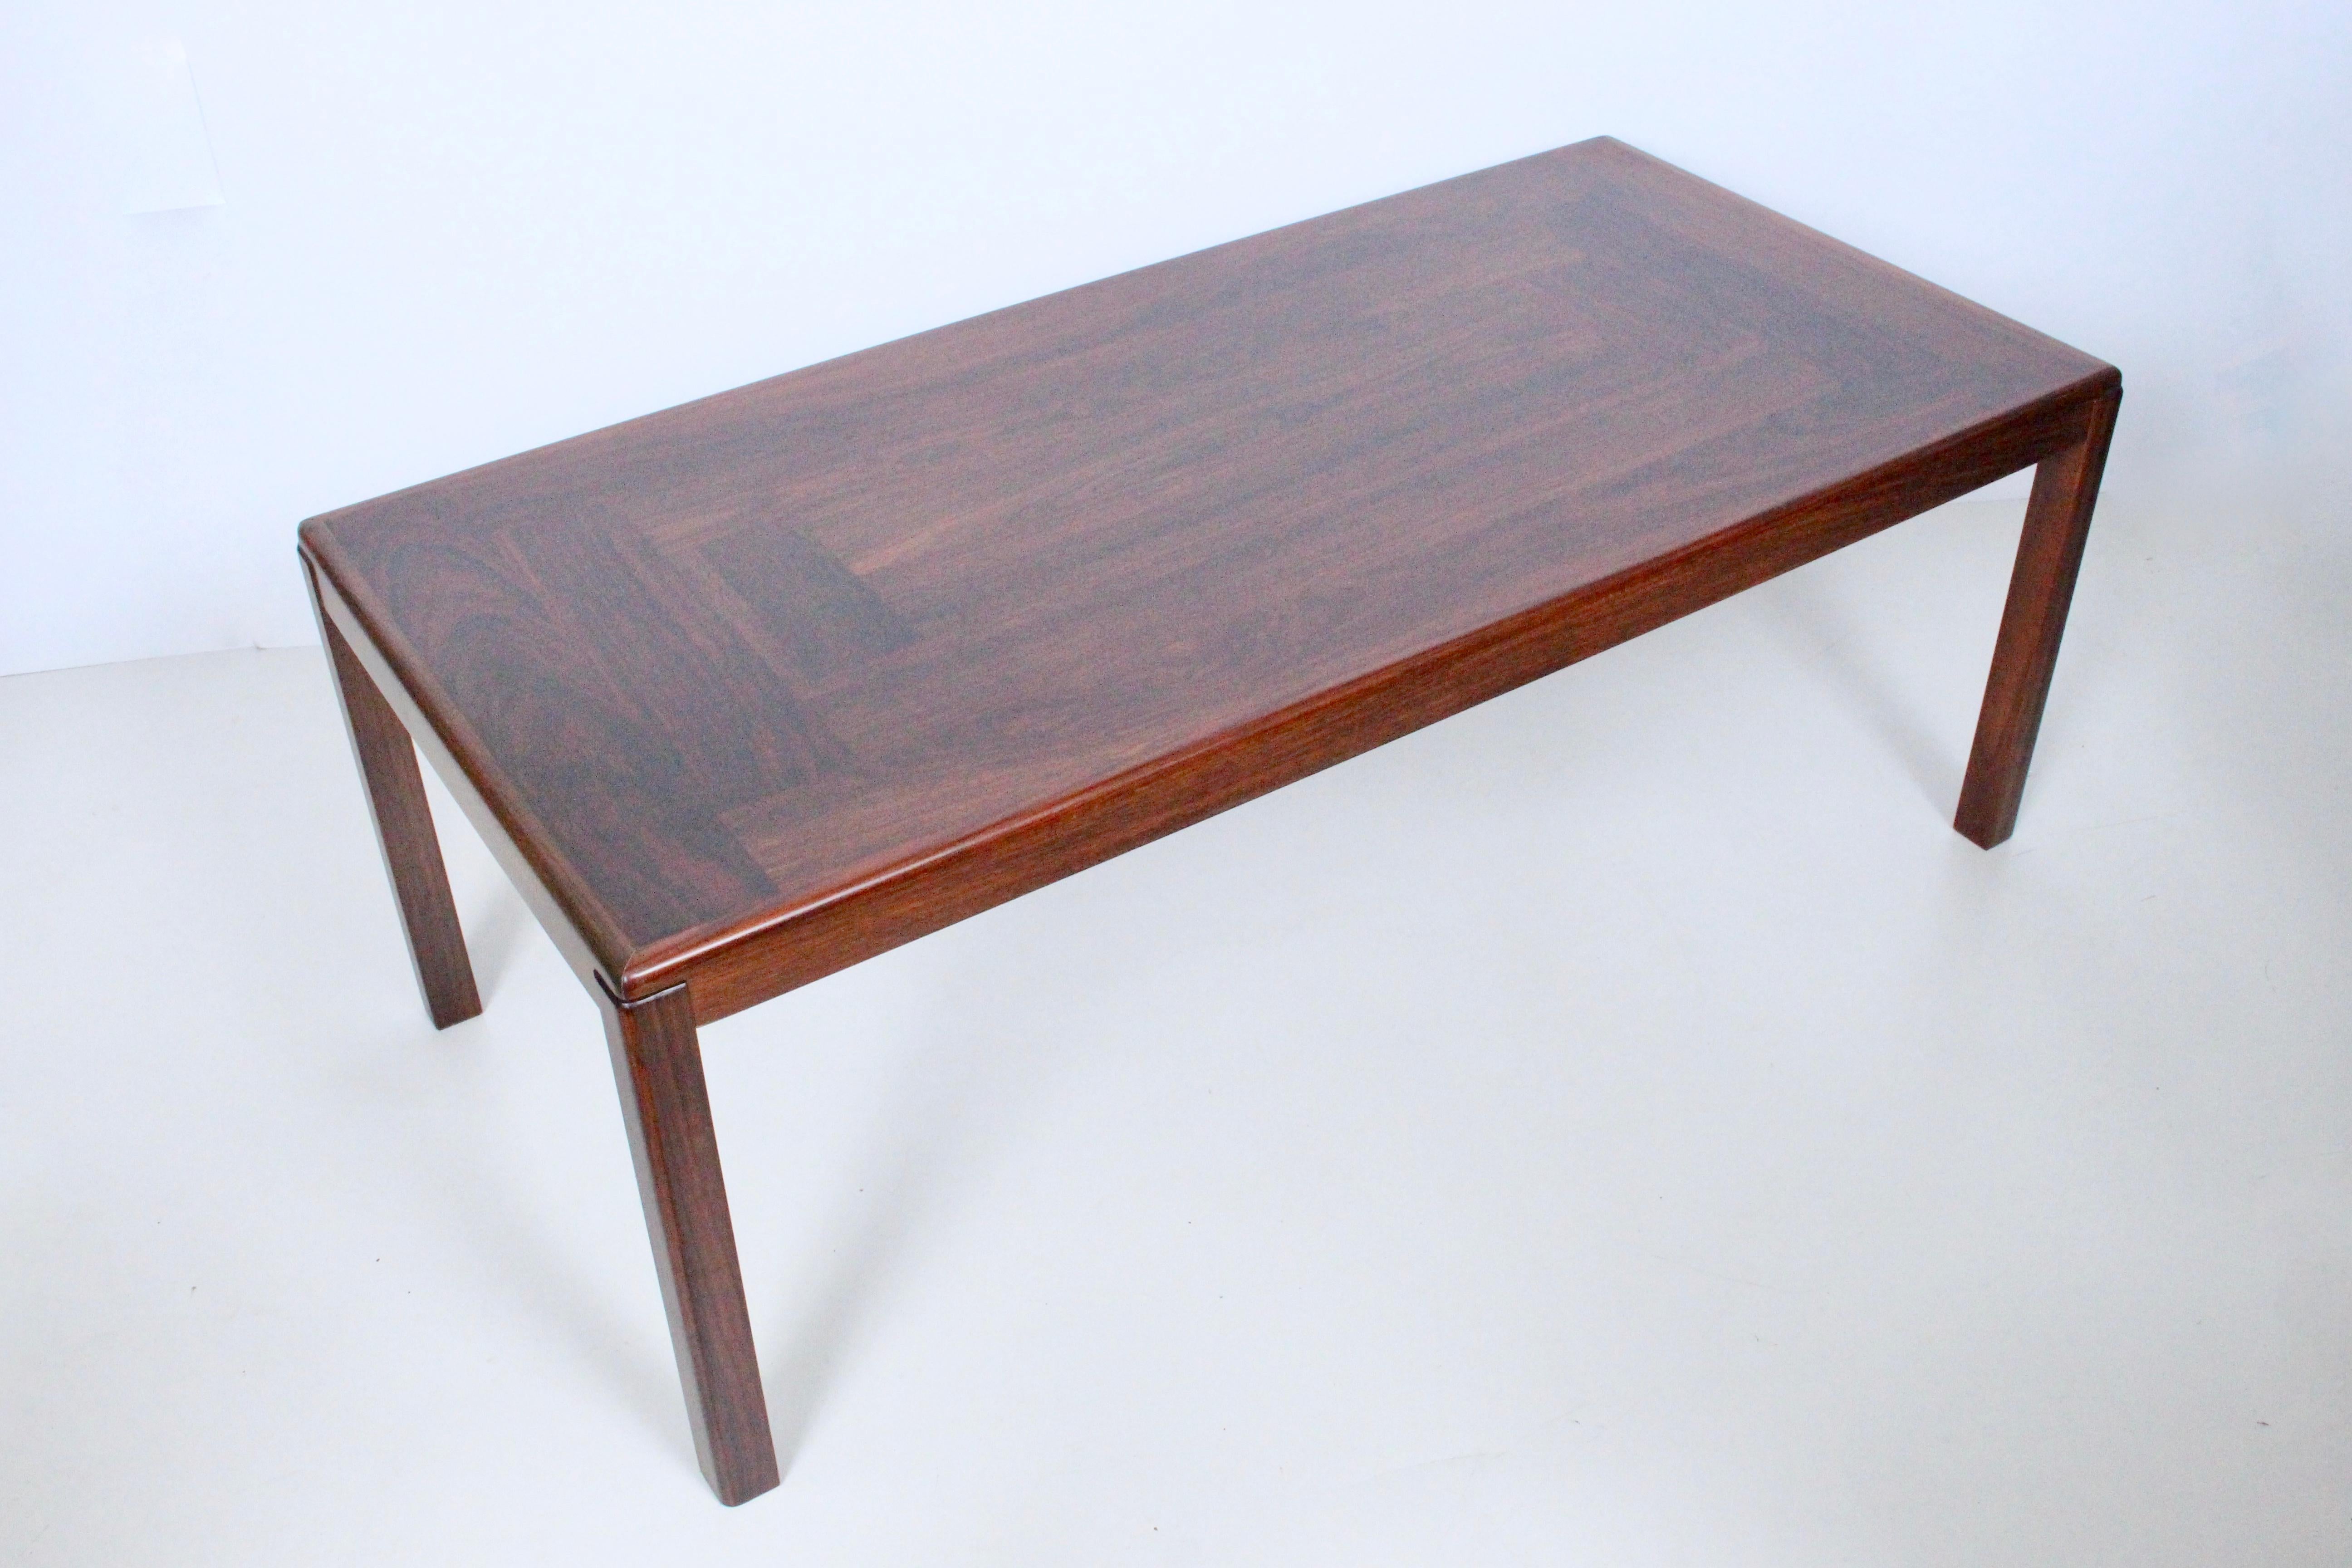 Danish Modern Vejle Stole Og Mobelfabrik rosewood coffee cocktail table. Featuring a rectangular beautiful, darkly grained reinforced Rosewood framework with solid Rosewood sides and legs. Stamped to underside, Vejle Stole og Mobelfabrik, Made in